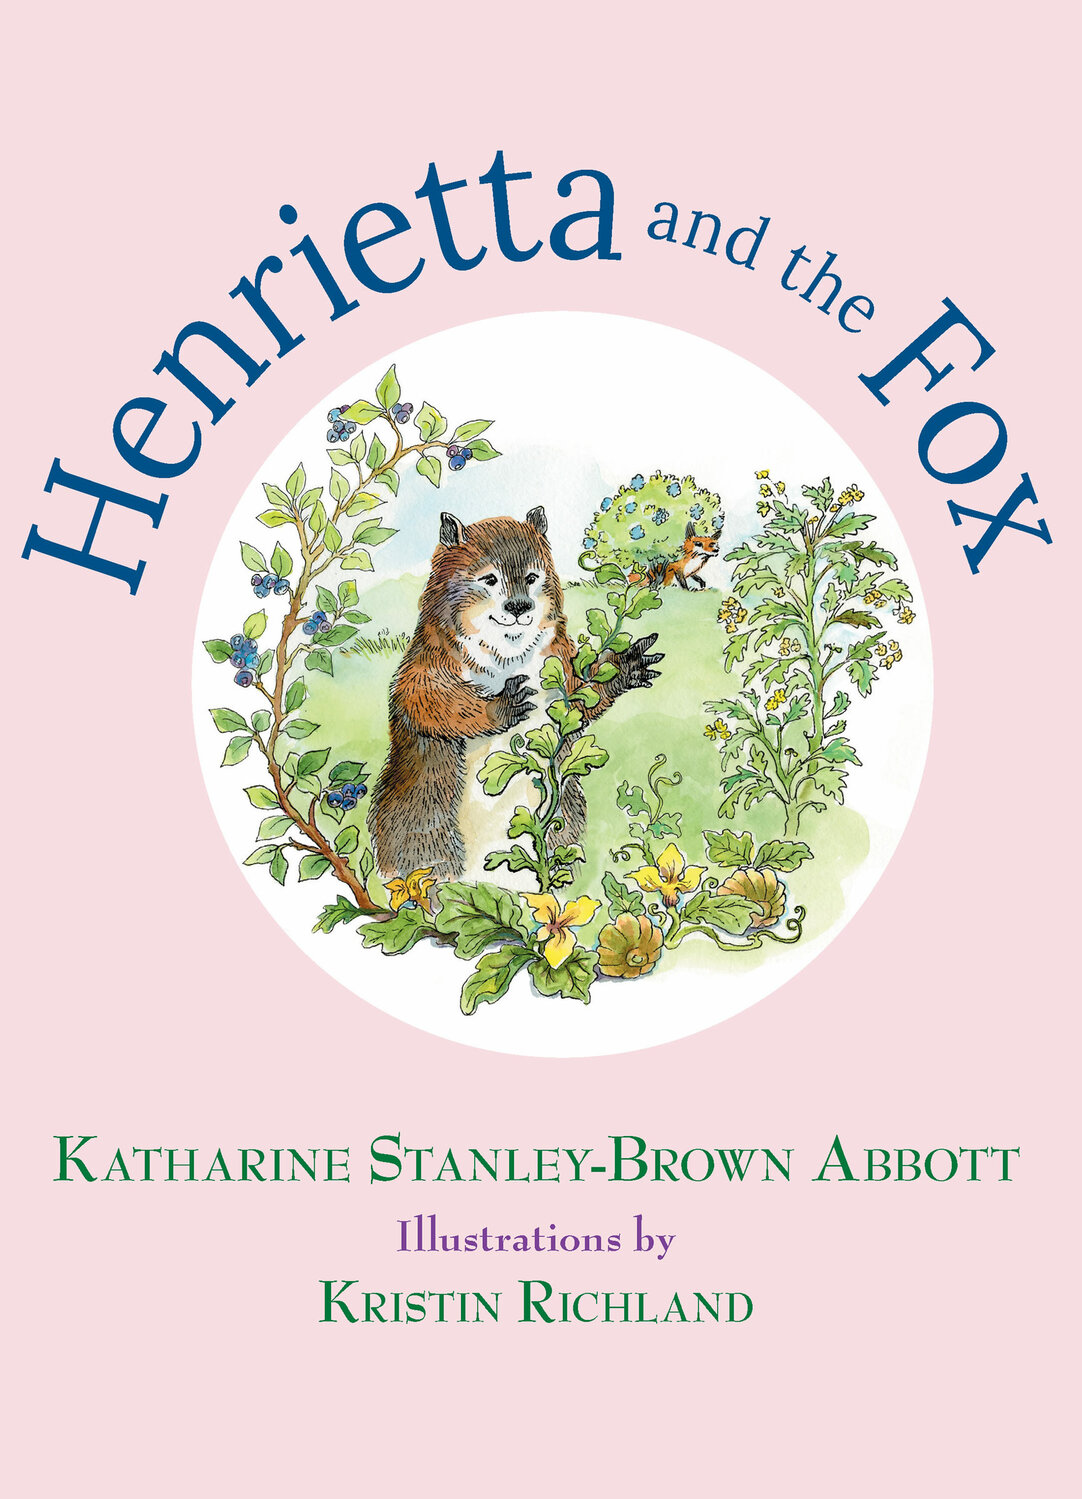 Henrietta and the Fox, by Katharine Standley-Brown Abbott, a Manchester resident.